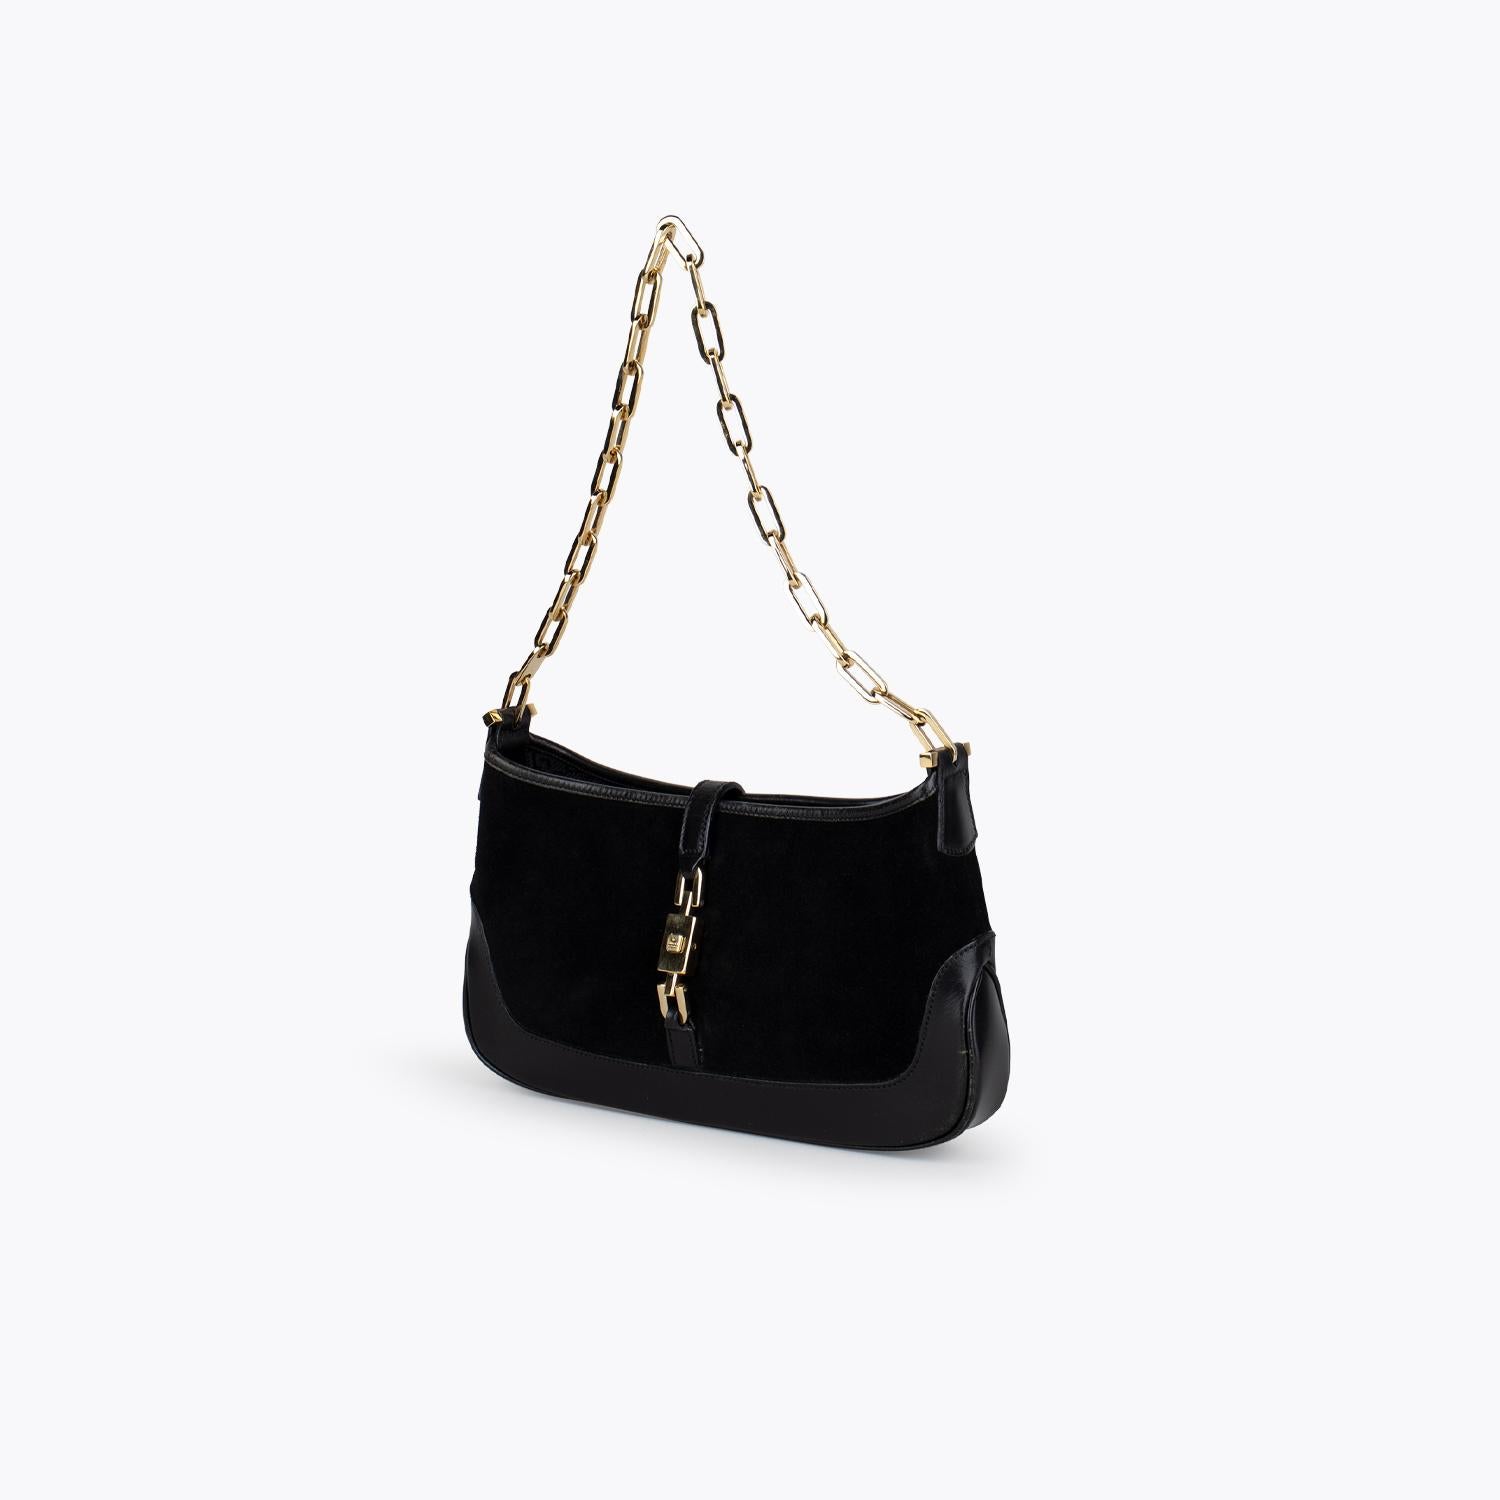 Black leather/suede Gucci Jackie O Chain Link Bag

- Gold hardware
- Single chain-link shoulder strap
- Black logo jacquard nylon lining
- Single pocket with zip closure at interior wall and piston-lock closure at front

Overall Preloved Condition: